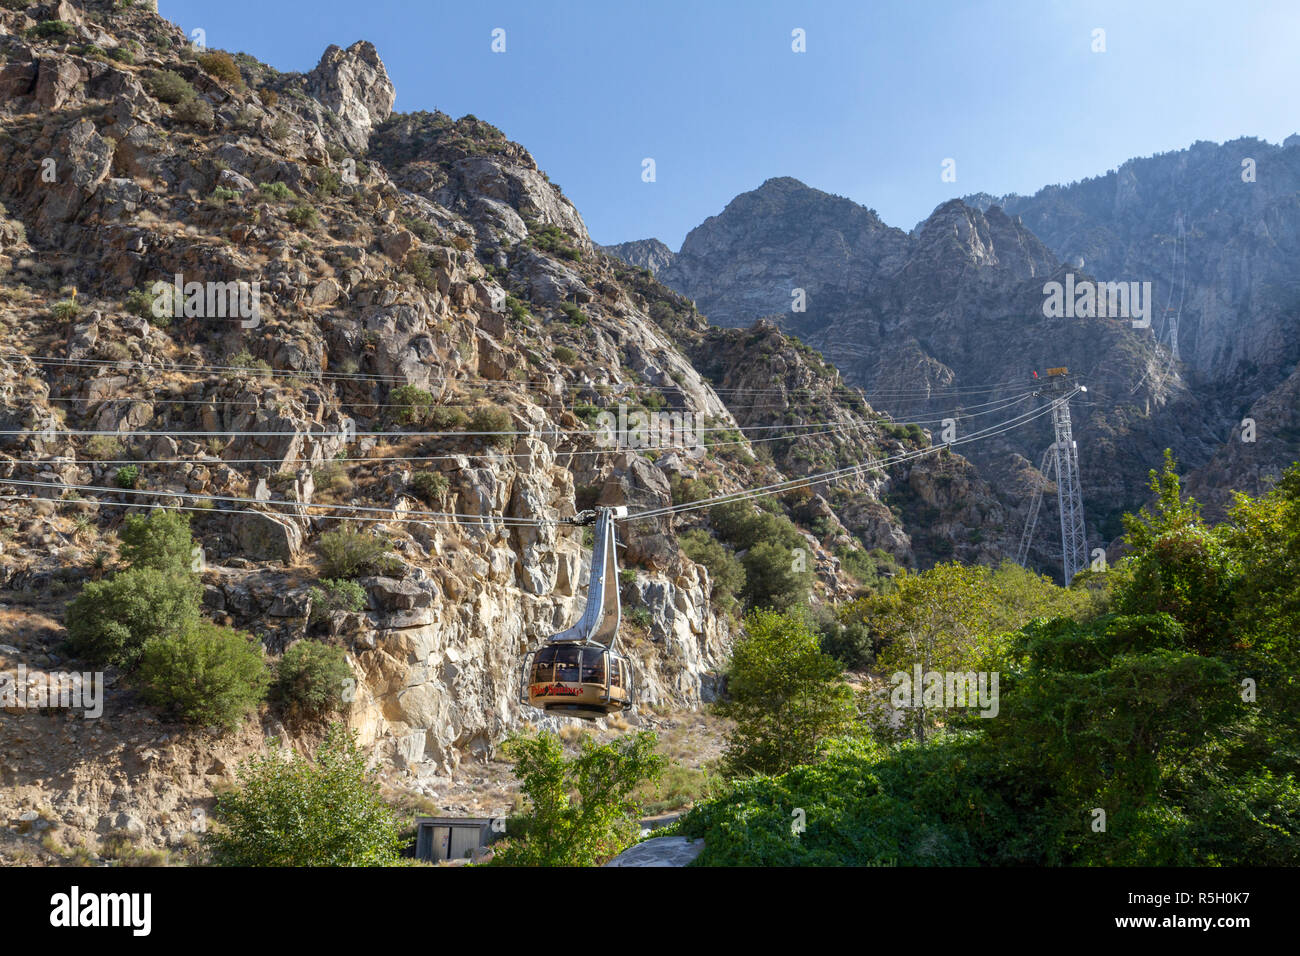 Palm Springs Aerial Tramway tramcar arriving at the lower station, Palm Springs, California, United States. Stock Photo